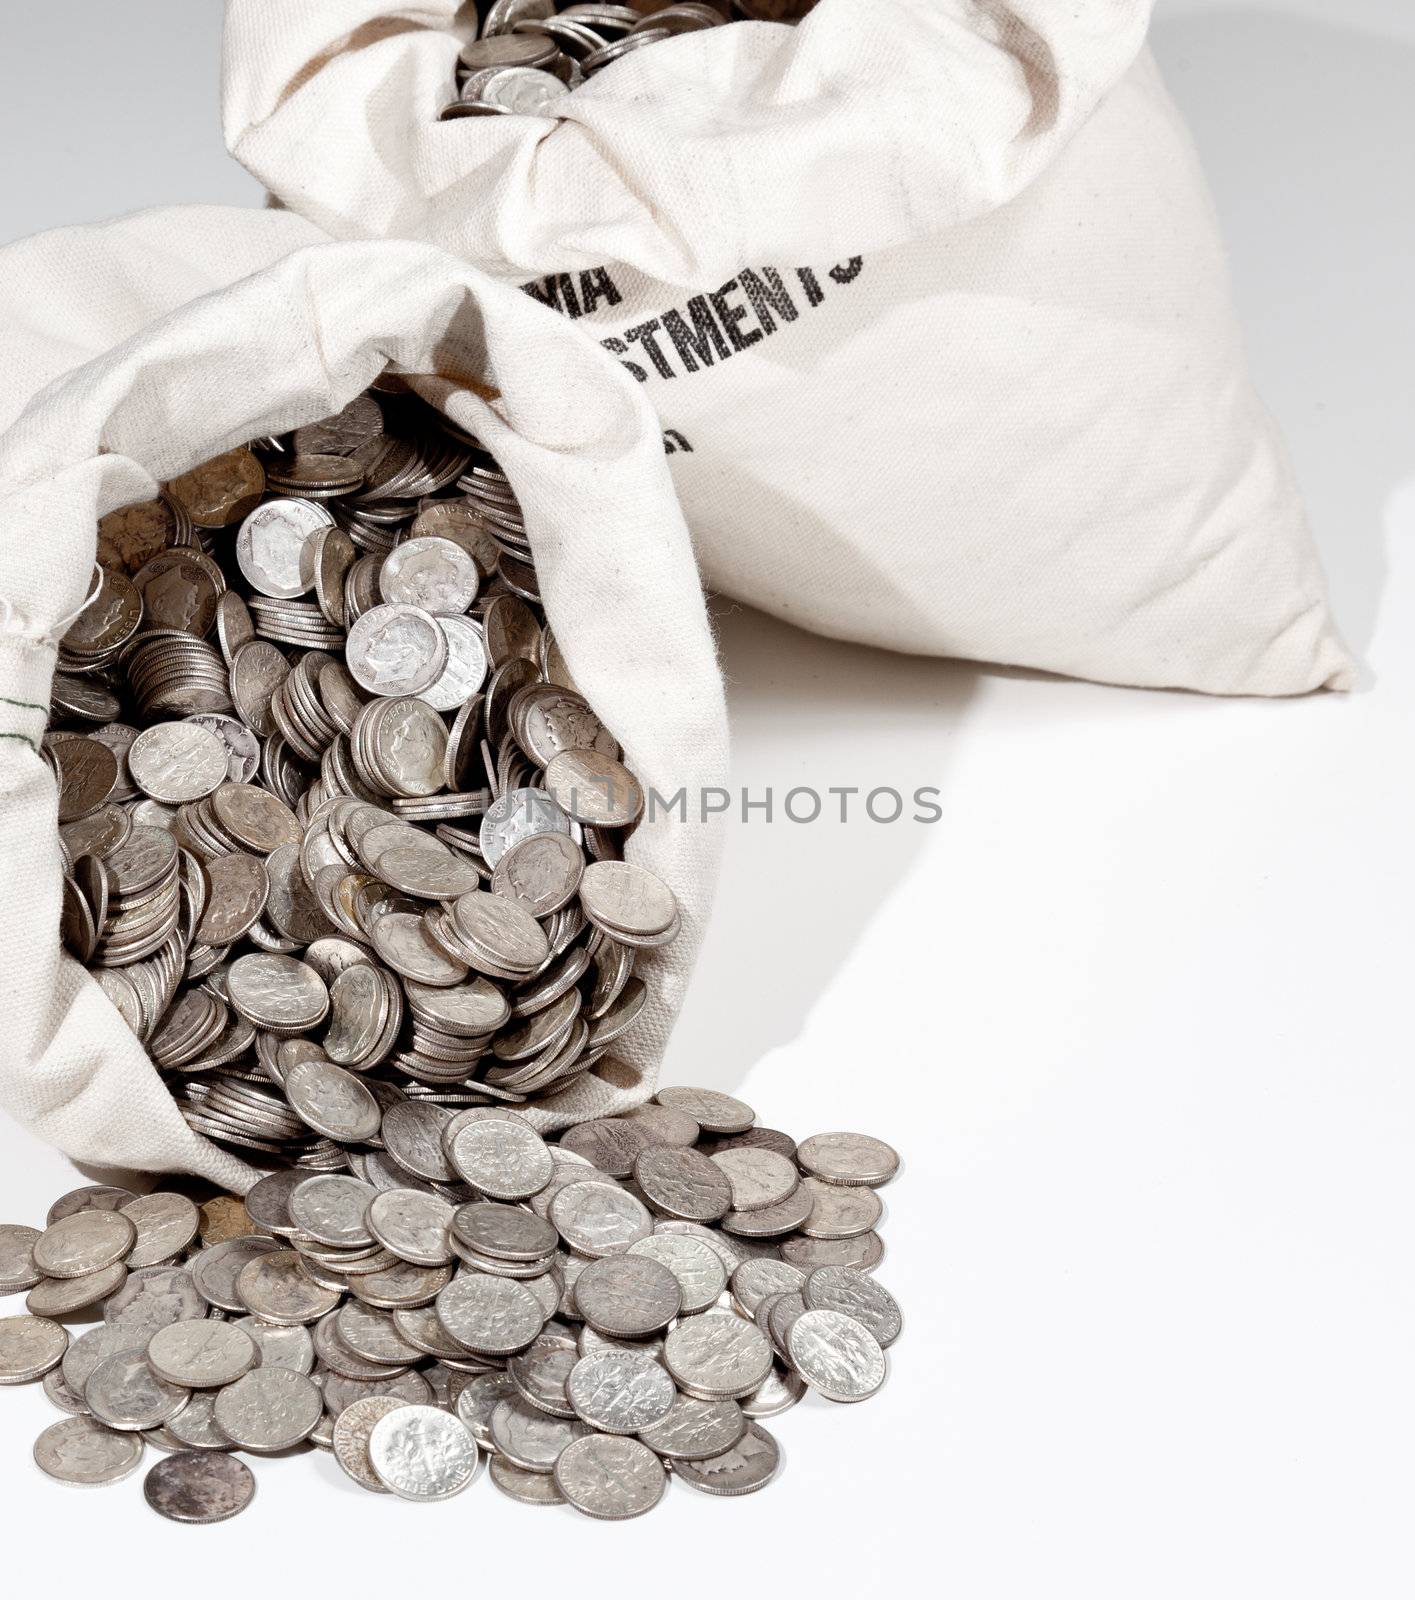 Bag of silver coins by steheap